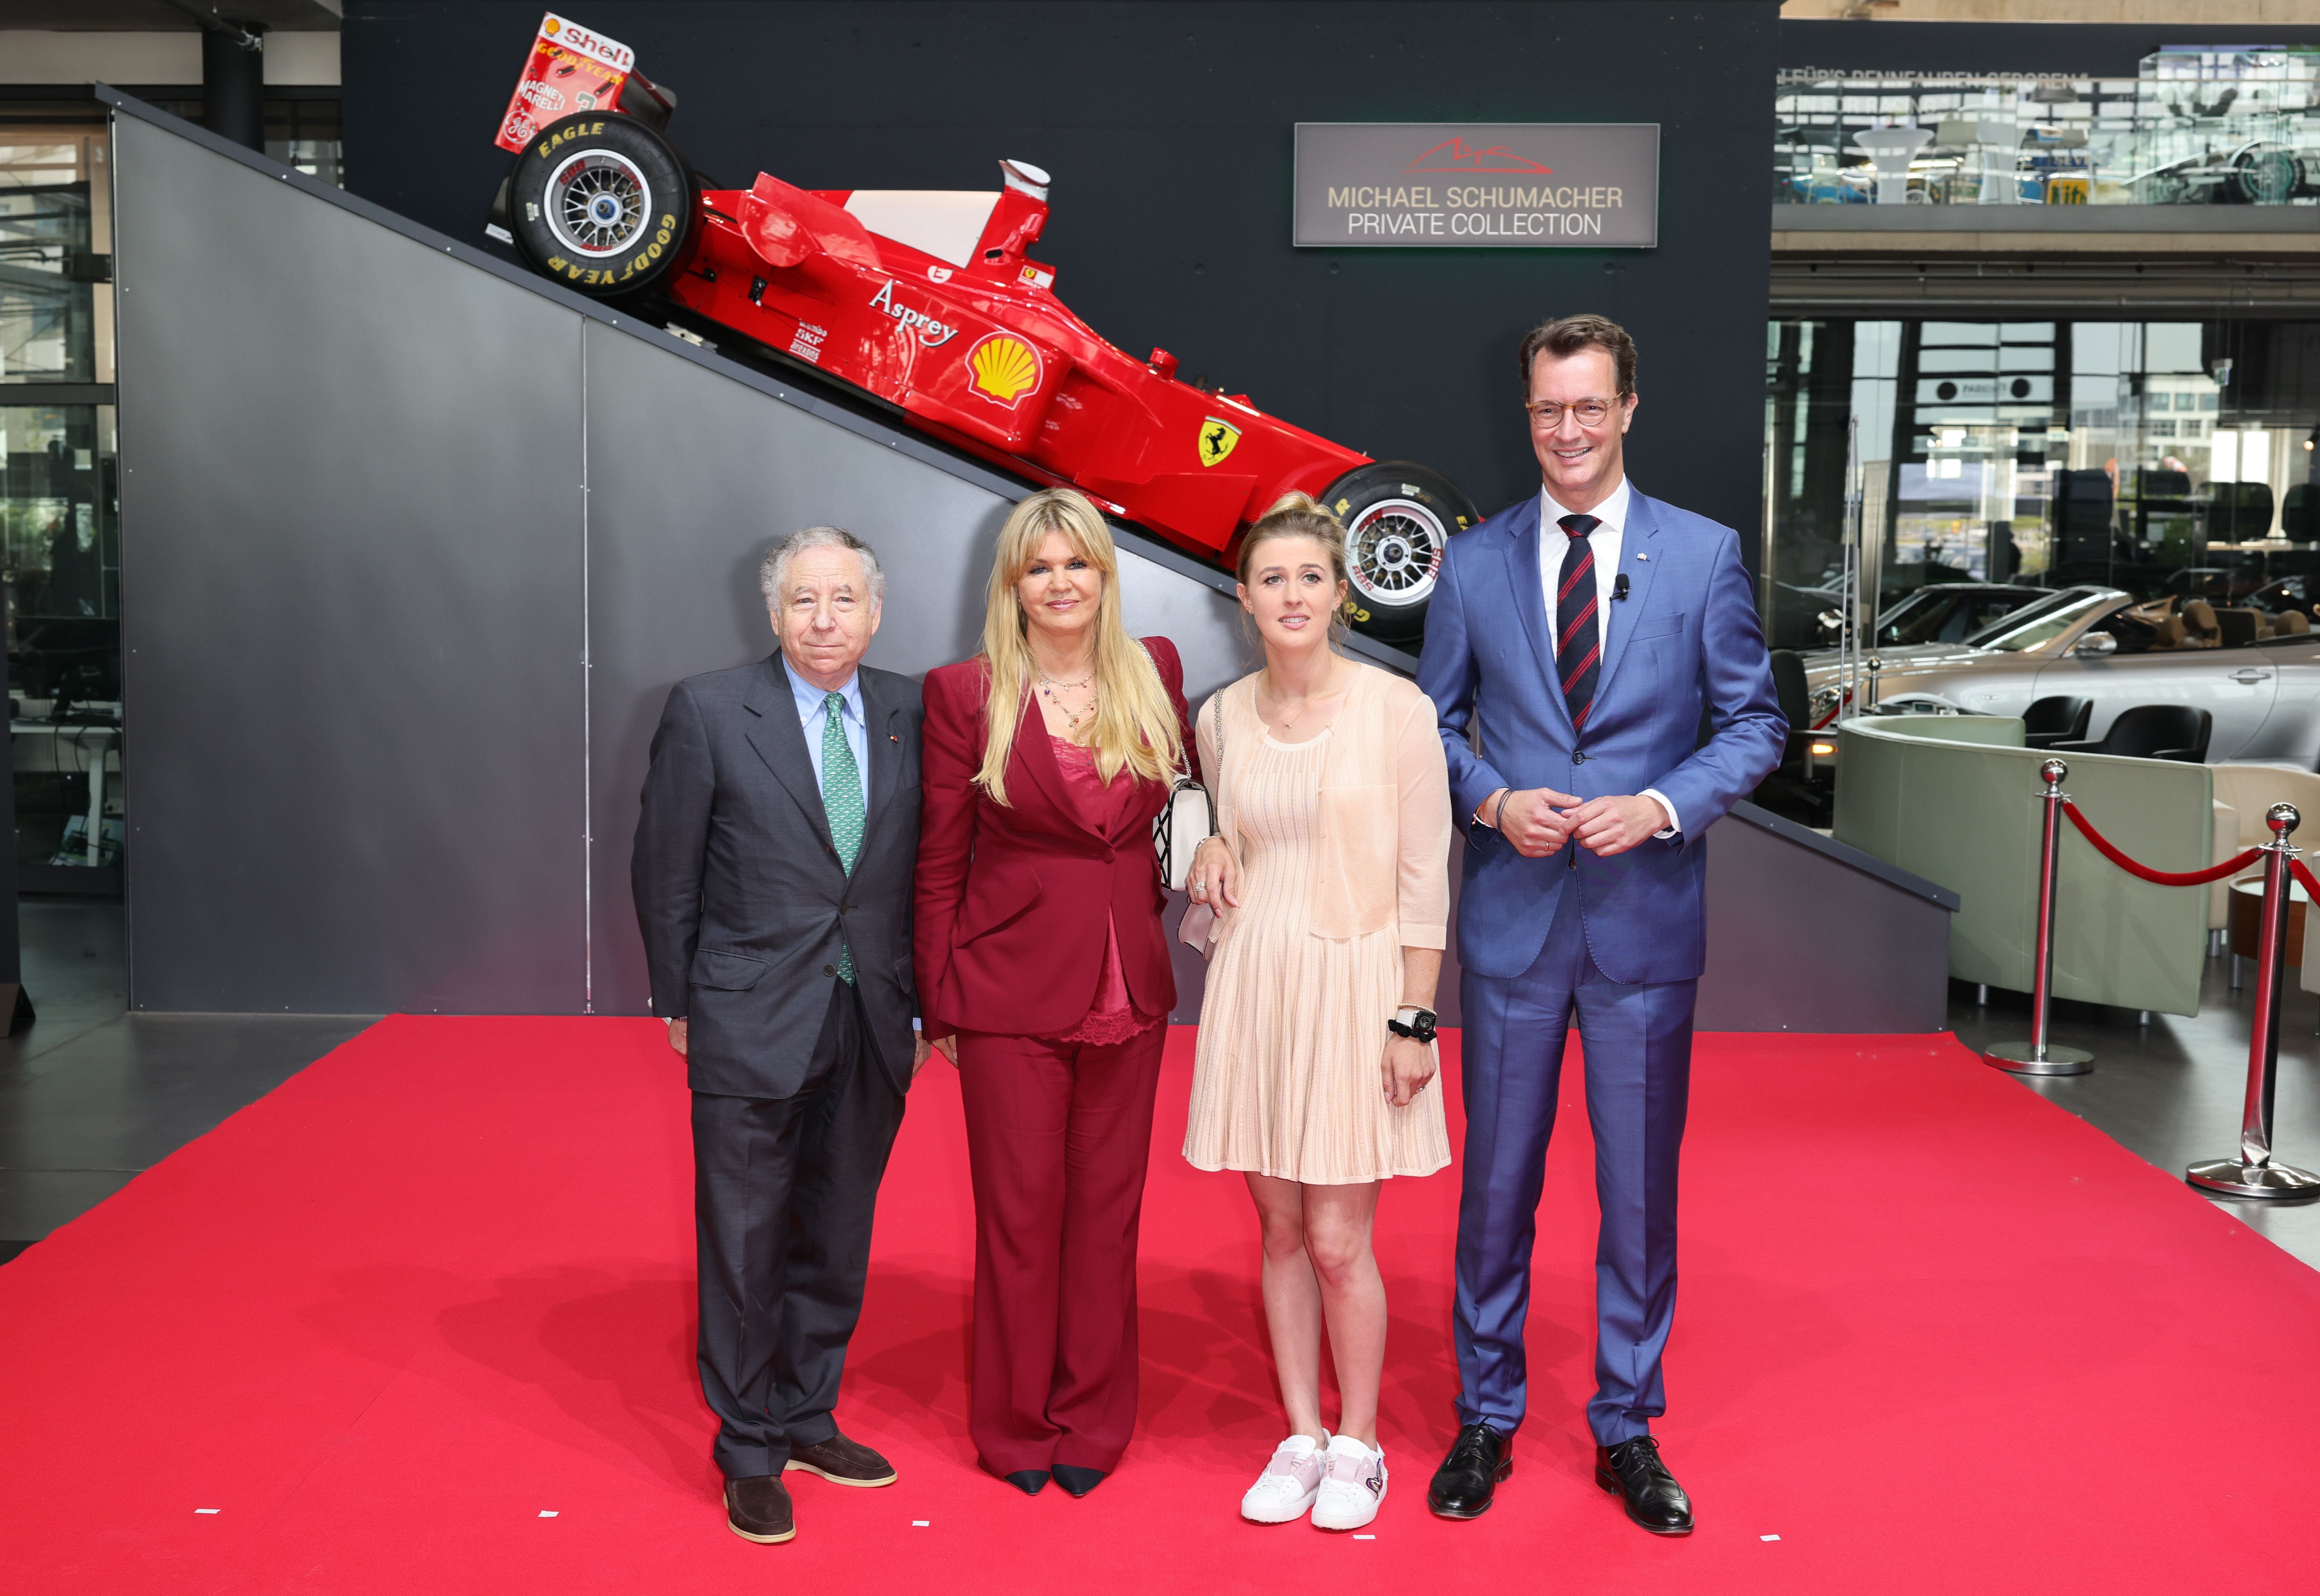 Jean Todt (far-left), was in attendance with Michael’s wife Corinna and their daughter Gina on Wednesday to collect the State Prize of North Rhine-Westphalia on Michael’s behalf